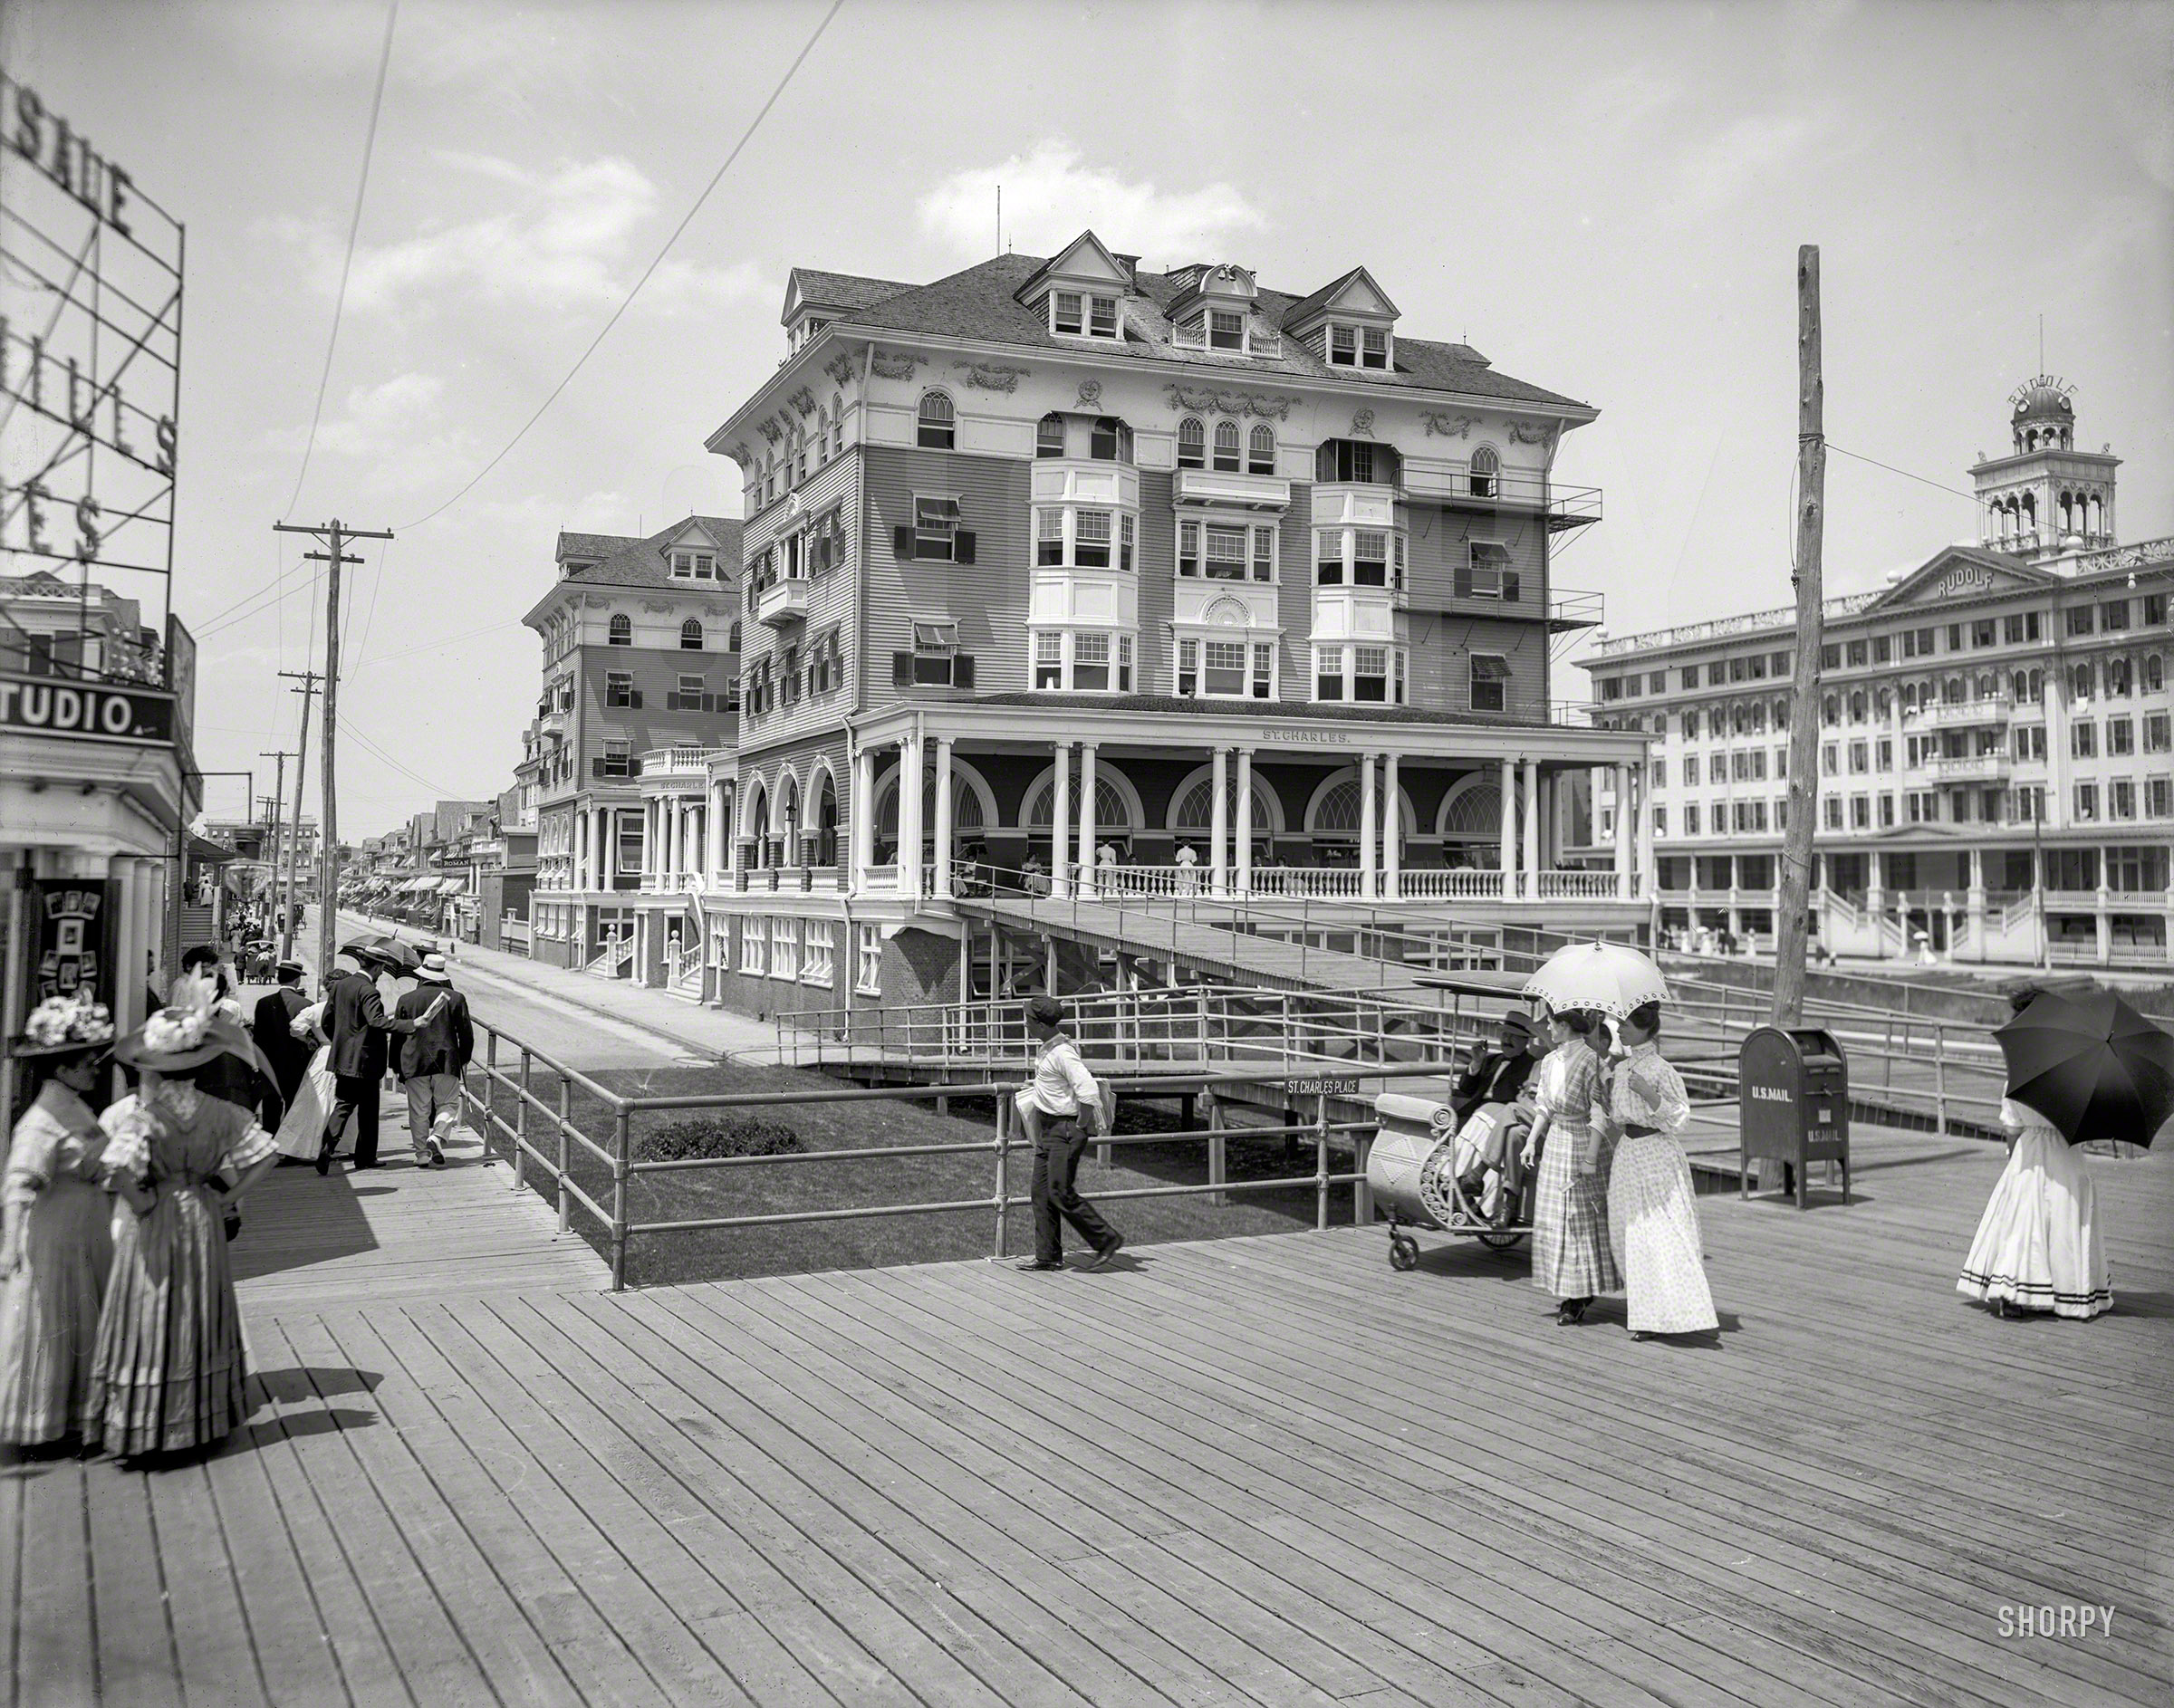 The Jersey Shore circa 1910. "St. Charles and Rudolf  hotels, Atlantic City." From the heyday of the Boardwalk, parasol and rolling chair. View full size.